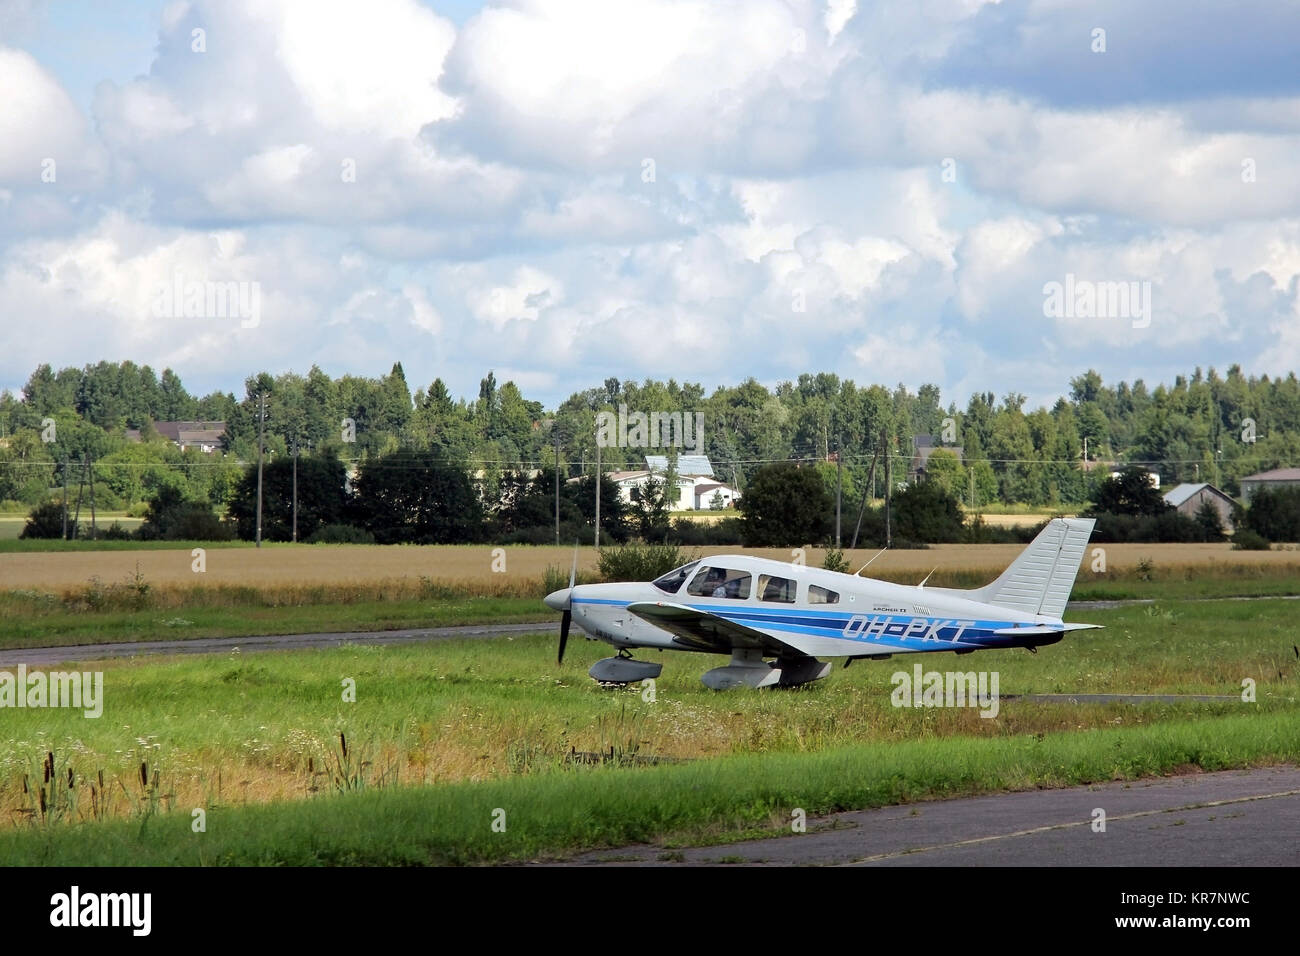 FORSSA, FINLAND - AUGUST 11, 2013: Moving Piper Archer 2 aeroplane ready to take off.  Piper Archer 2 is a light aircraft designed for flight training Stock Photo